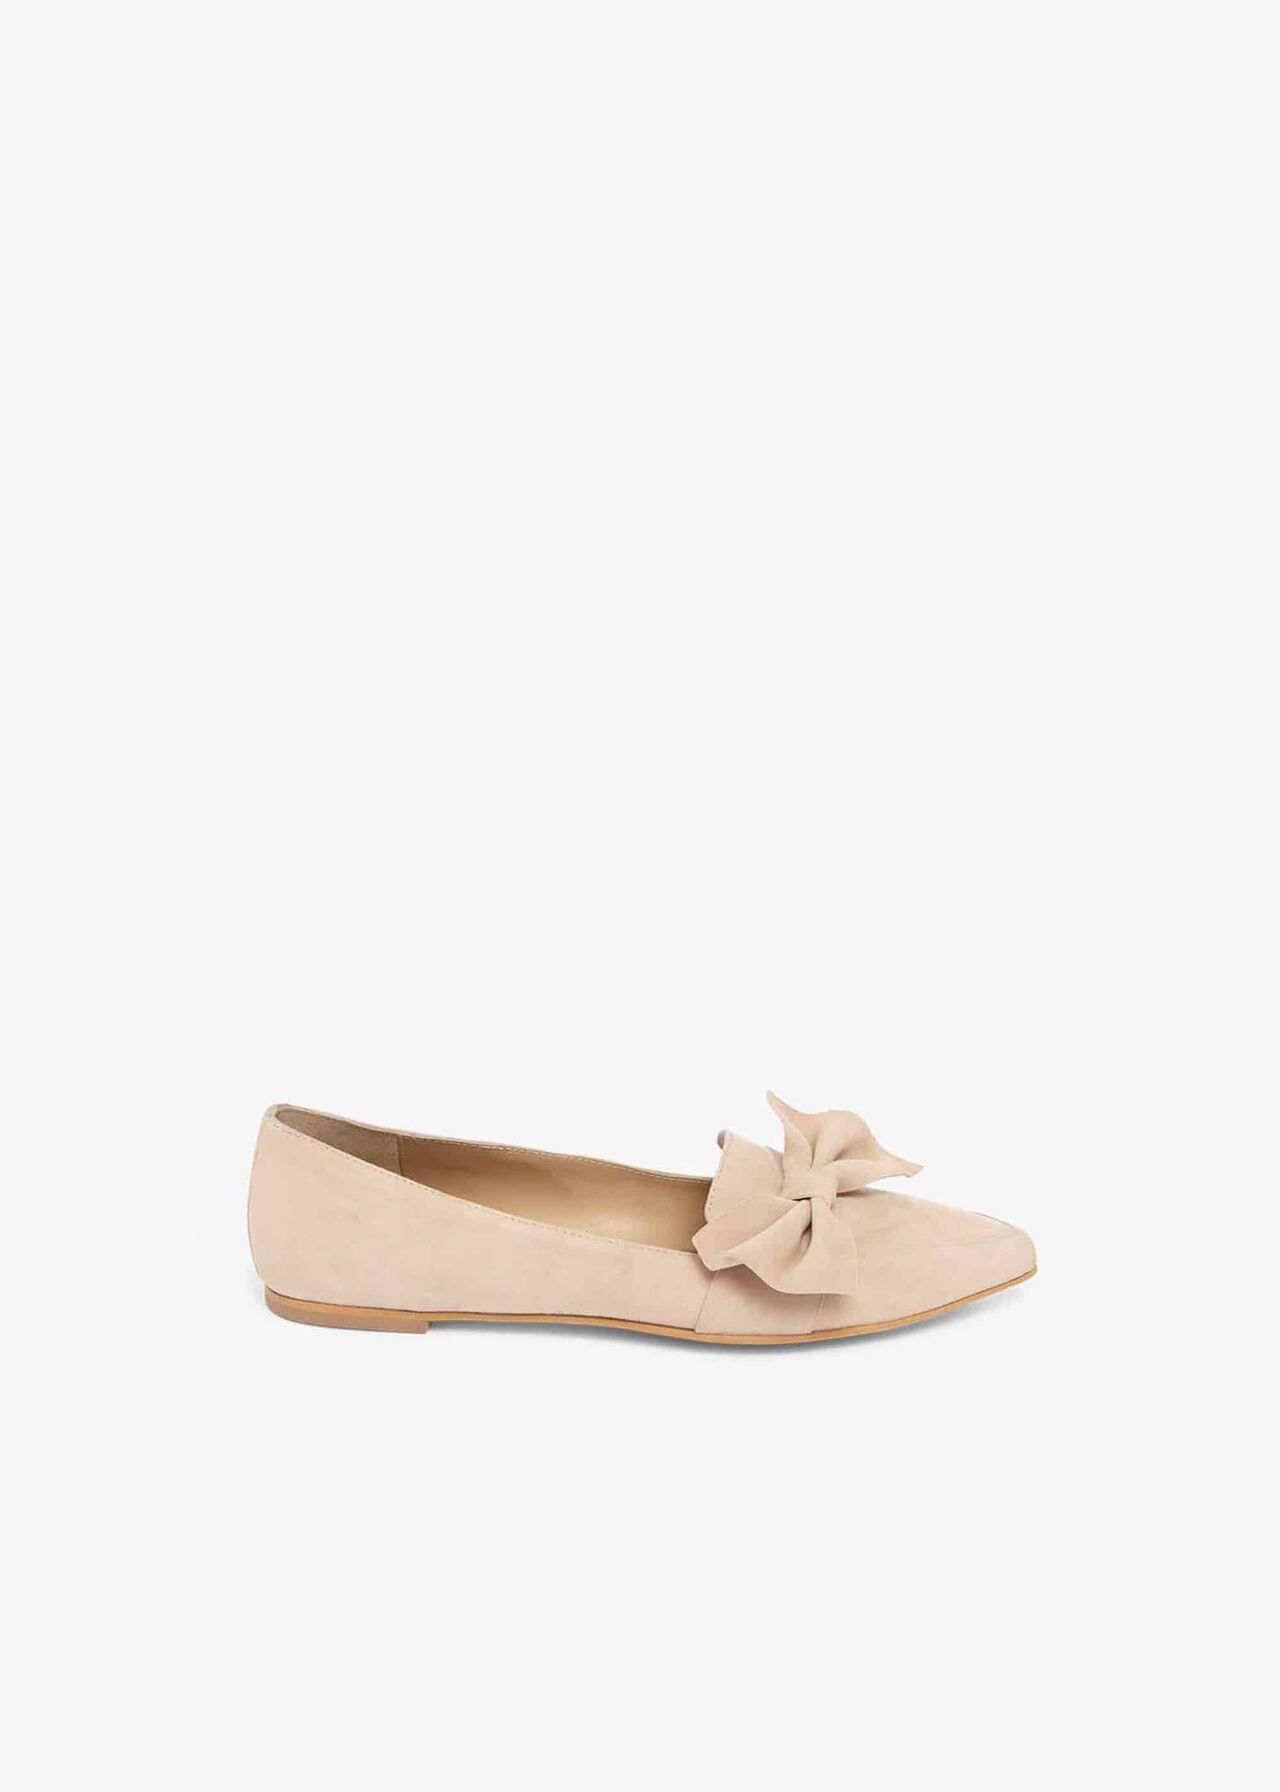 Salome Leather Side Bow Flat Shoes